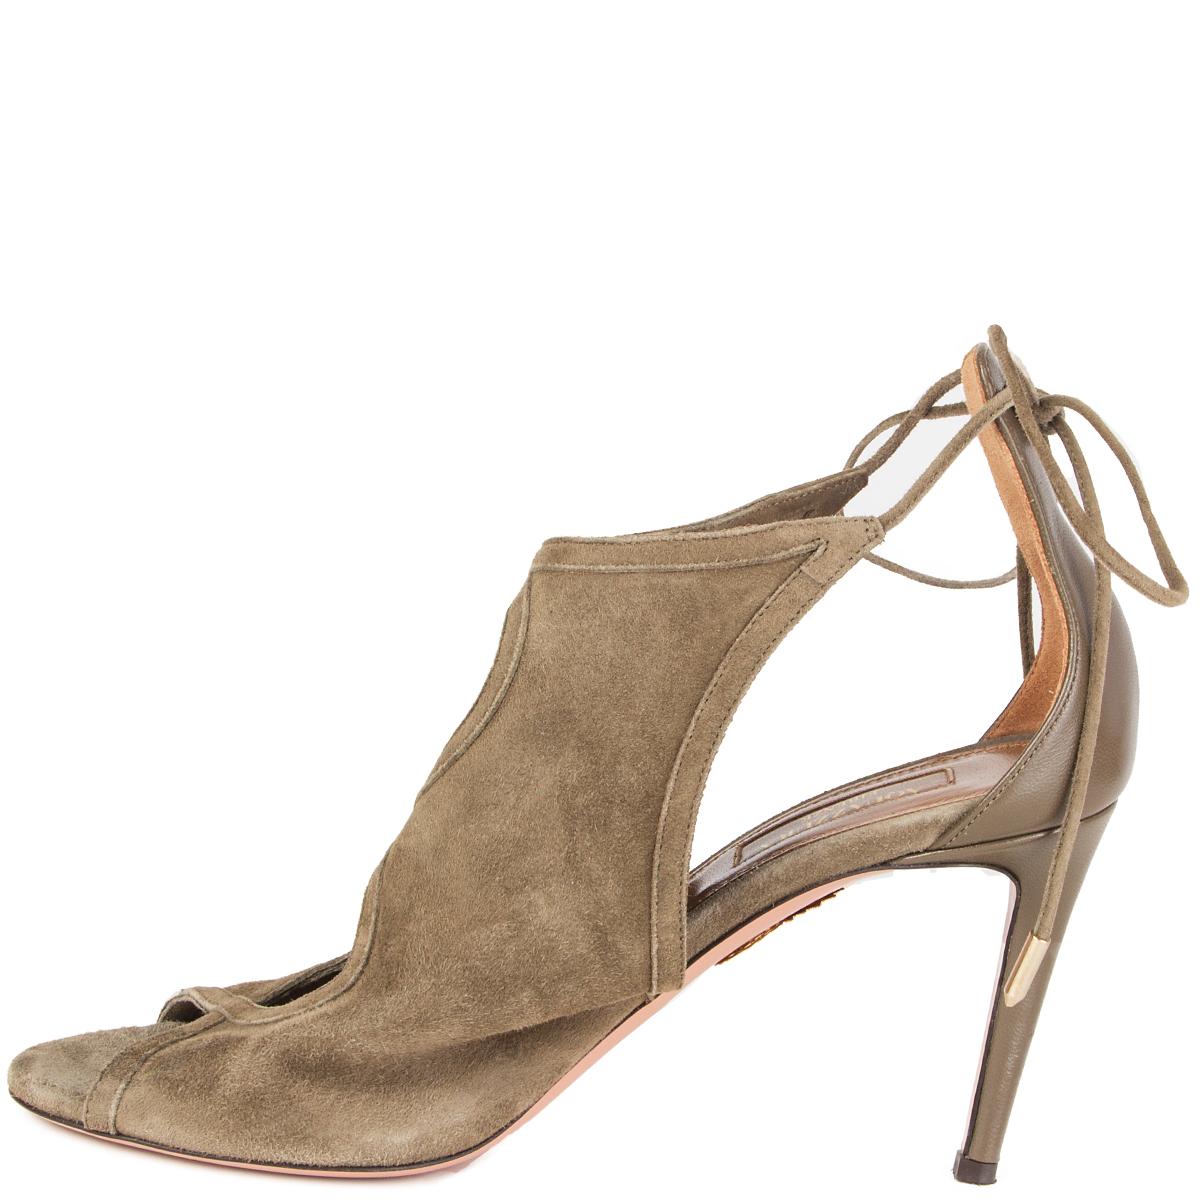 100% authentic Aquazzura 'Nomad Sandal 85' sandals in khaki green suede and calfskin. Tie around ankle. Have been worn and are in excellent condition. 

Measurements
Imprinted Size	37.5
Shoe Size	37.5
Inside Sole	24.5cm (9.6in)
Width	7.5cm